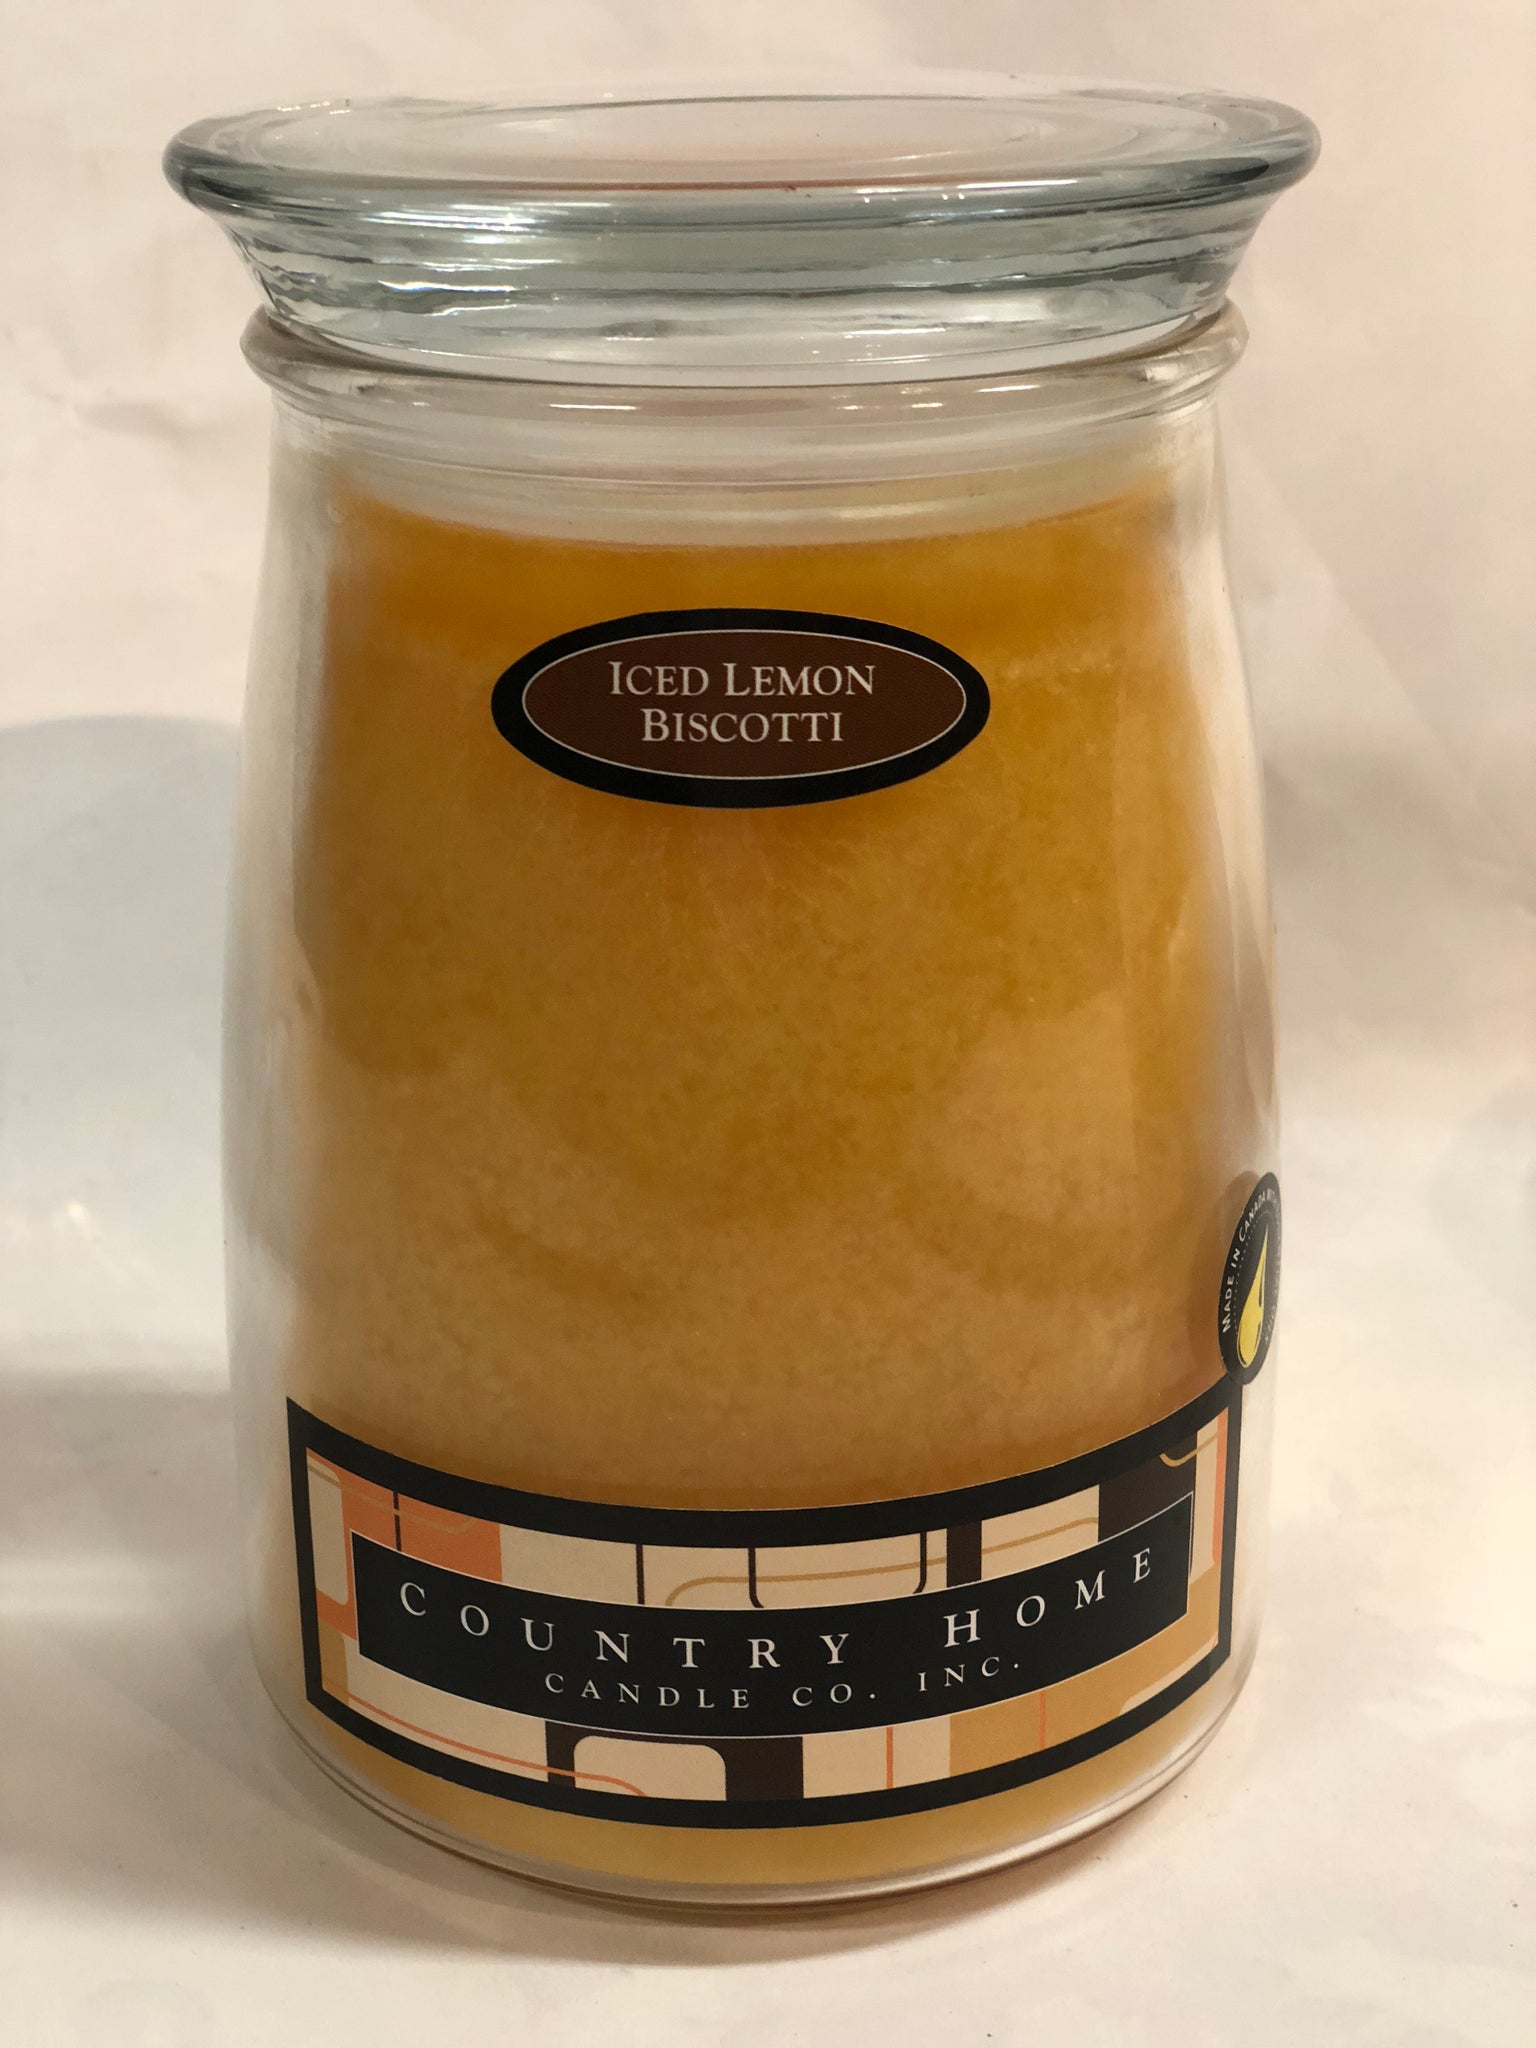 Country Home Jar Candle - Iced Lemon Biscotti